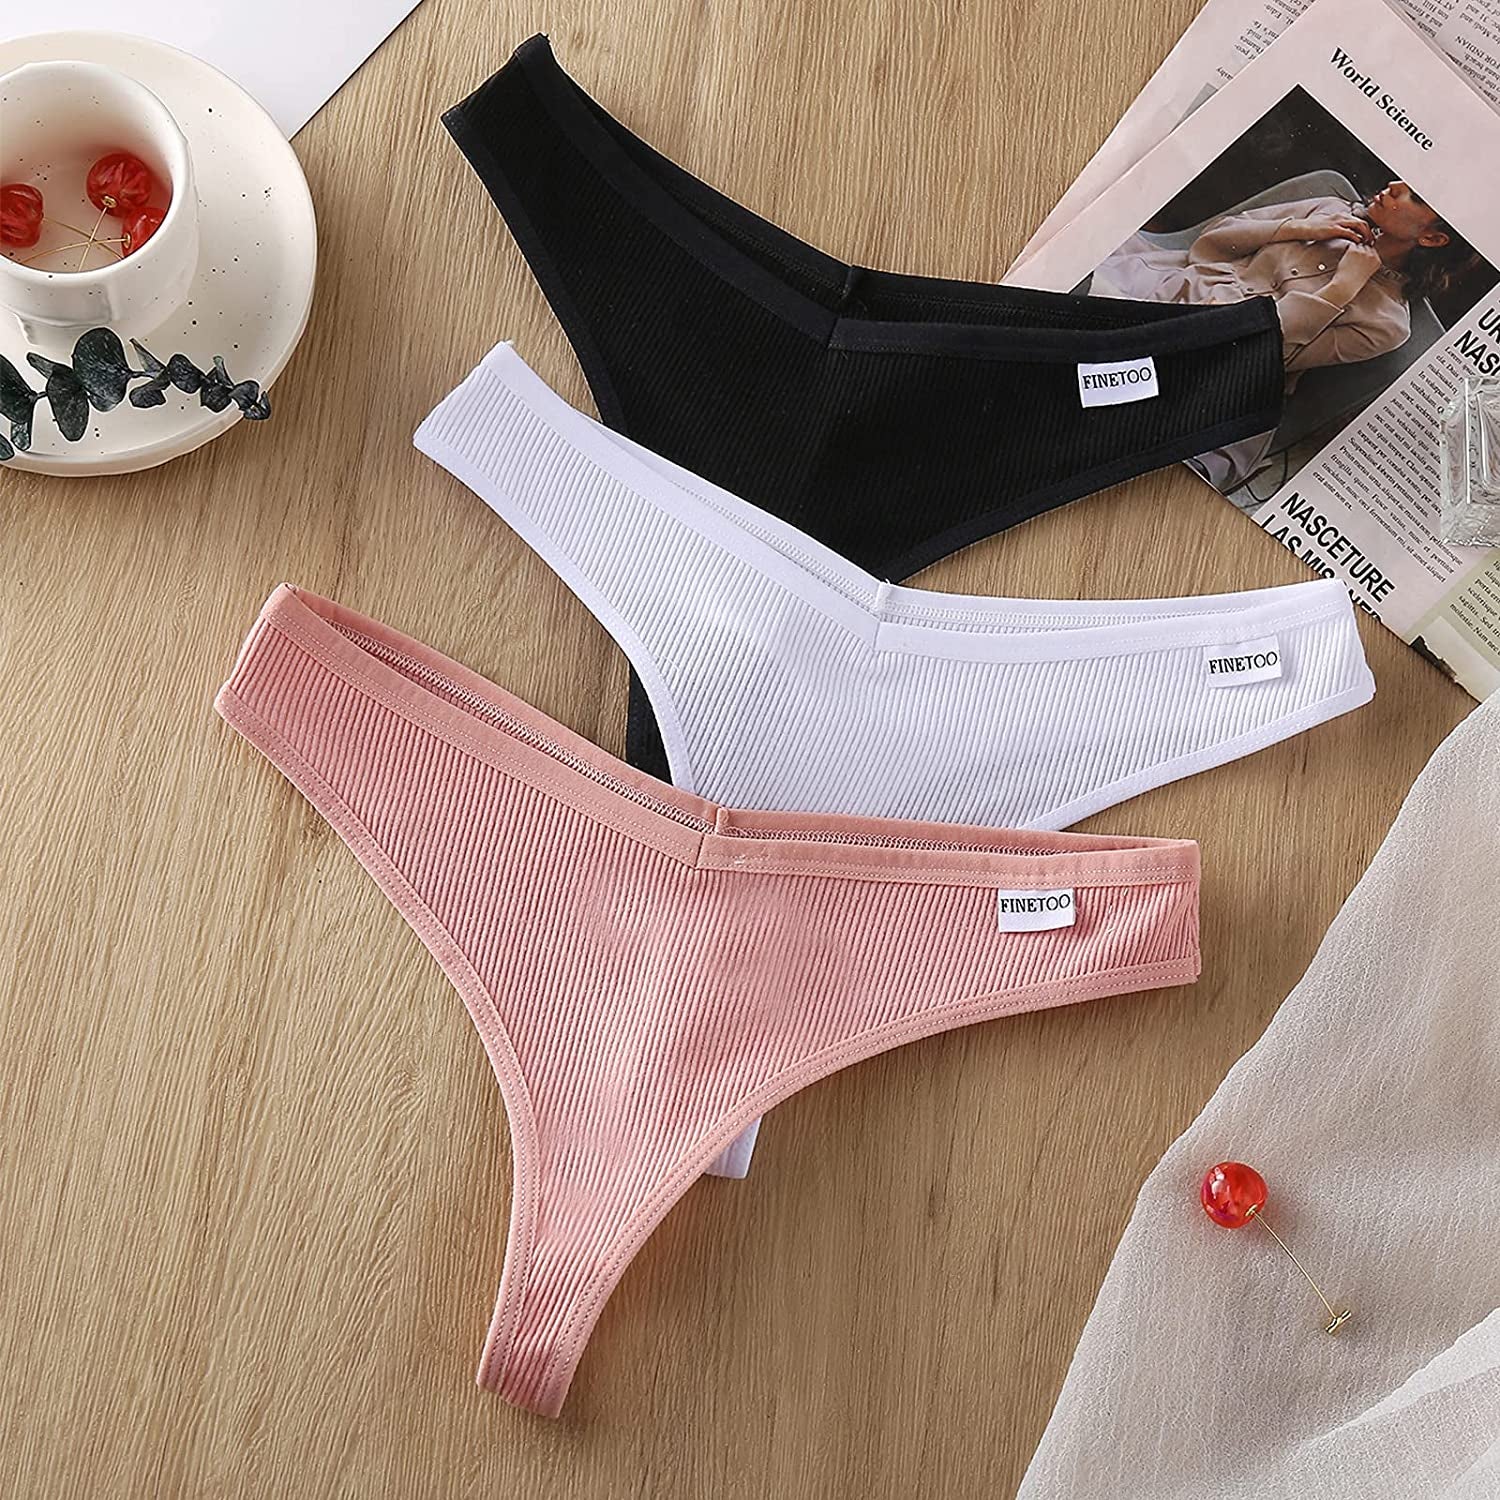 17 Most Comfortable Thongs of 2021 According to Editors